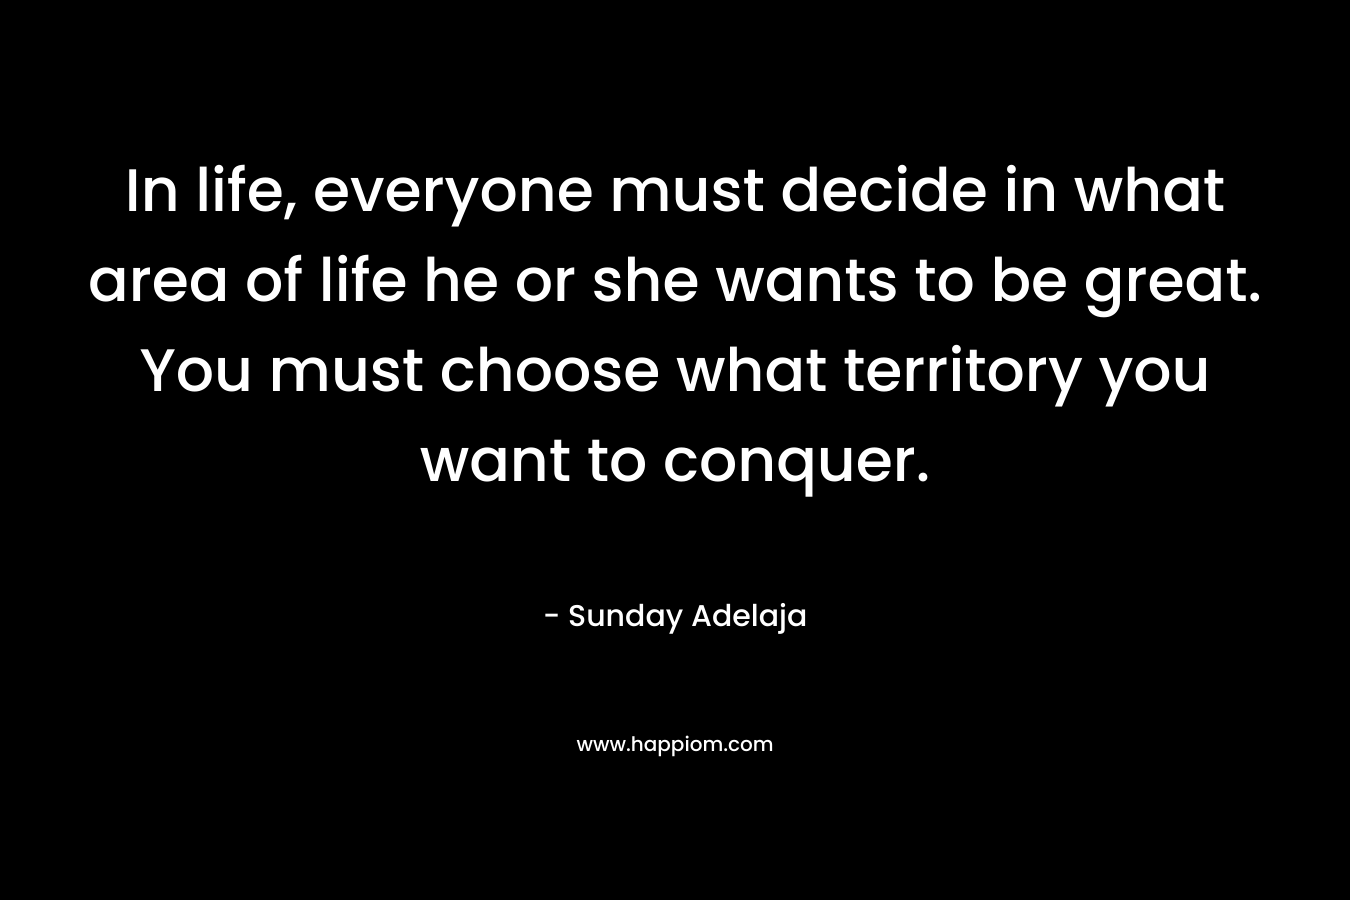 In life, everyone must decide in what area of life he or she wants to be great. You must choose what territory you want to conquer.